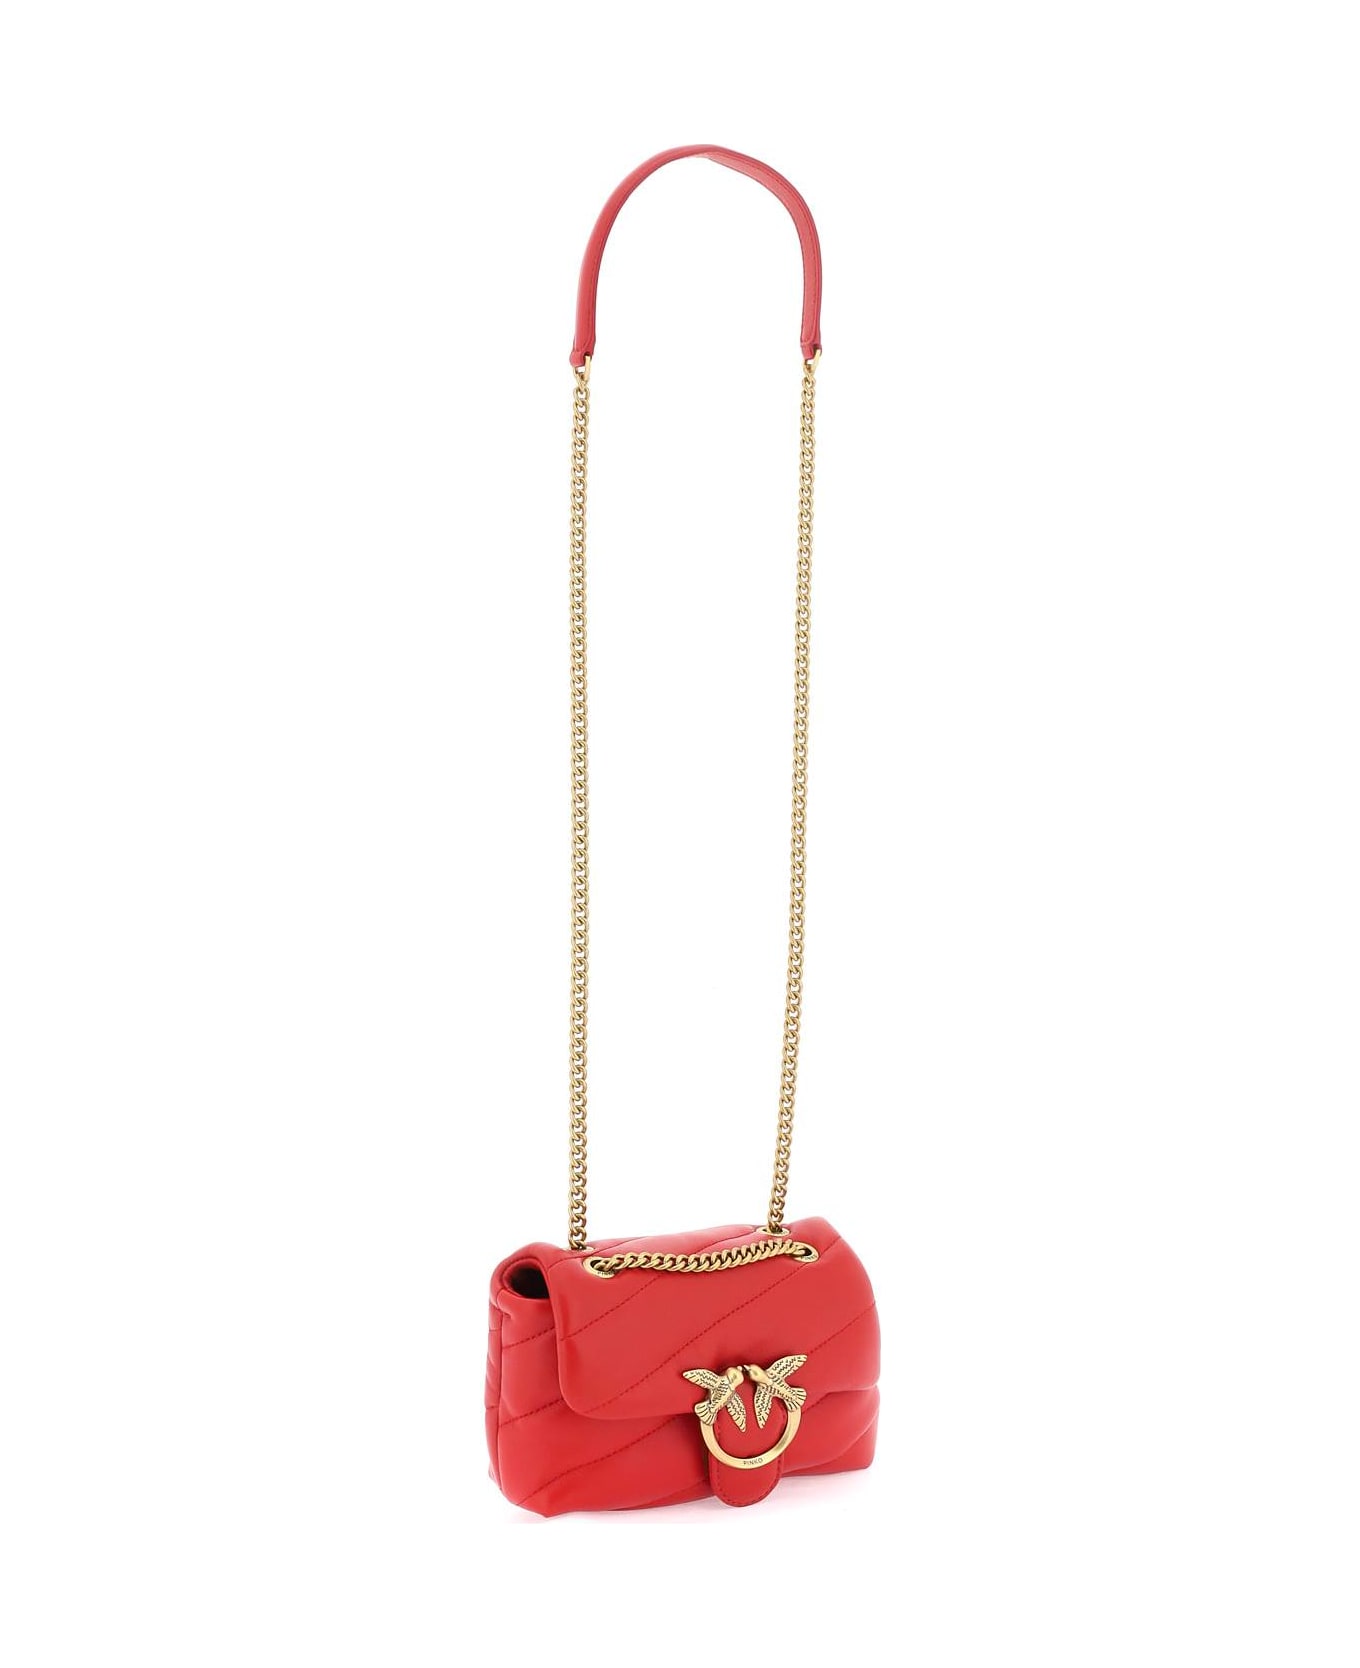 Pinko Love Baby Puff Quilt Bag - ROSSO ANTIQUE GOLD (Red)